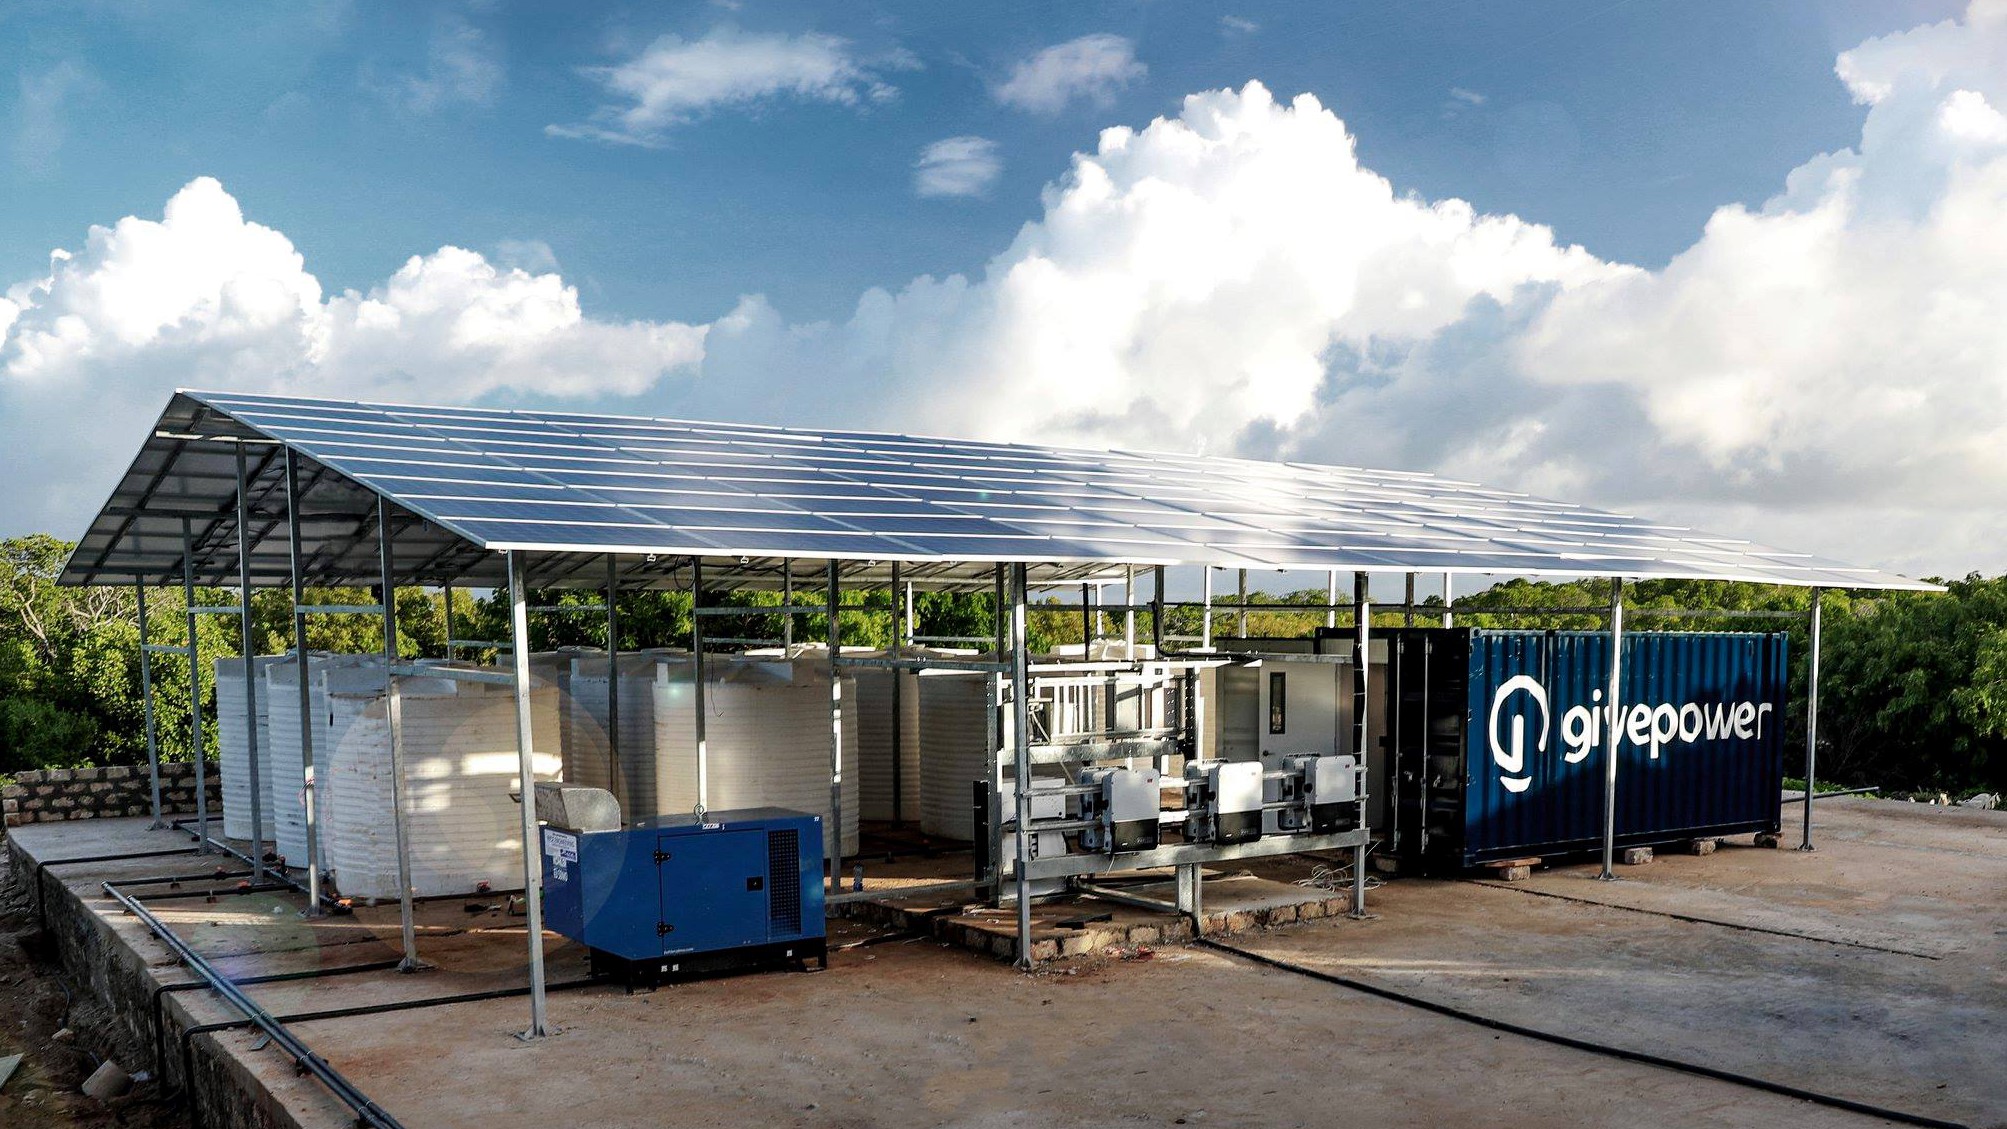 GivePower's Solar Water Farm Max is shown, which has a solar panel roof above a desalination system and water tanks.